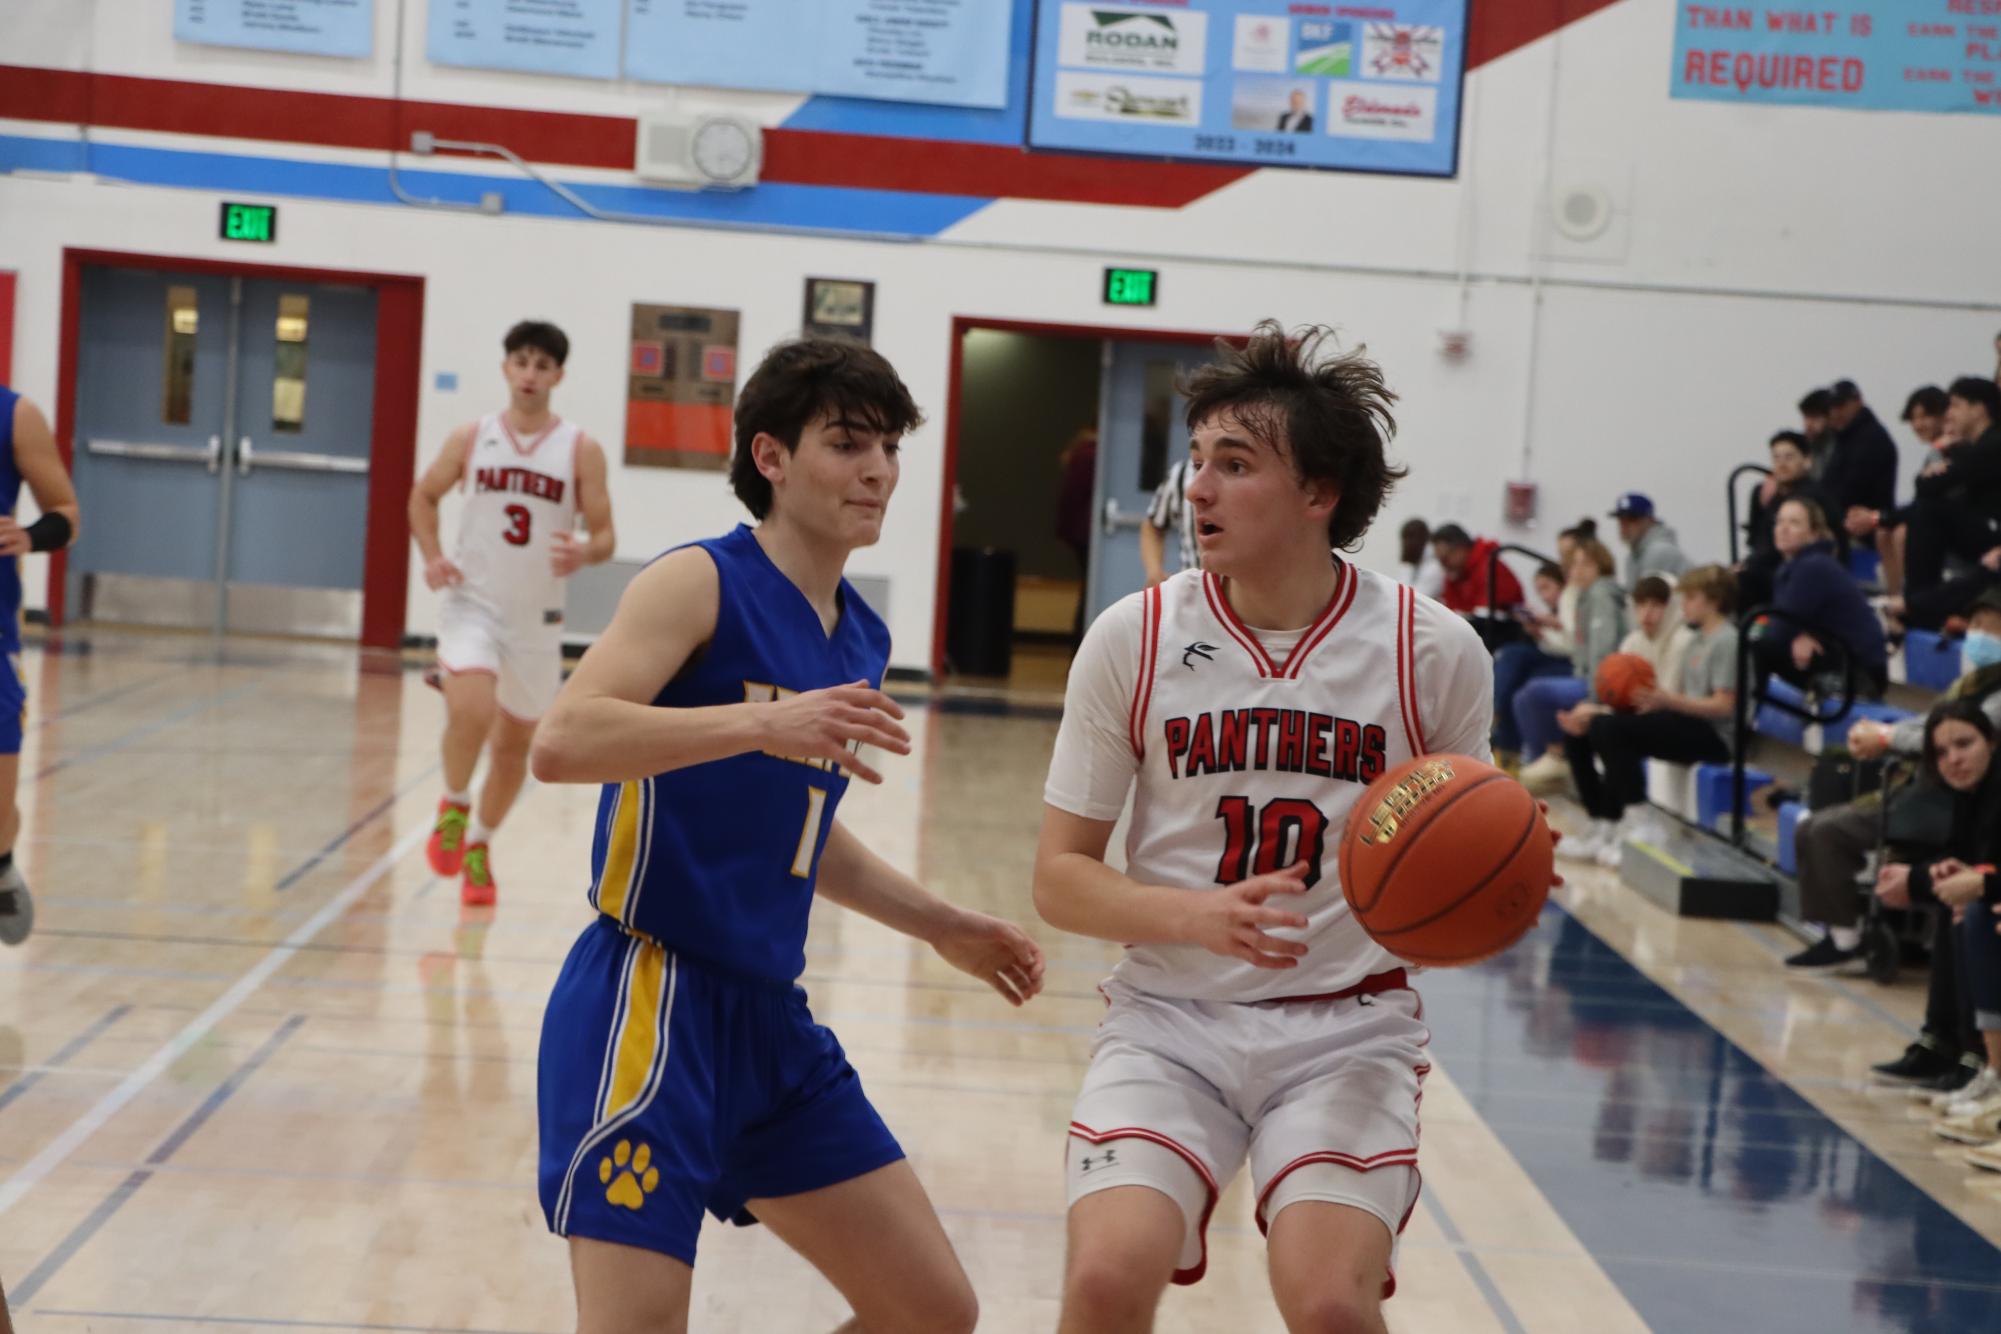 Boys’ basketball blows out Prospect in CCS playoffs – The Burlingame B